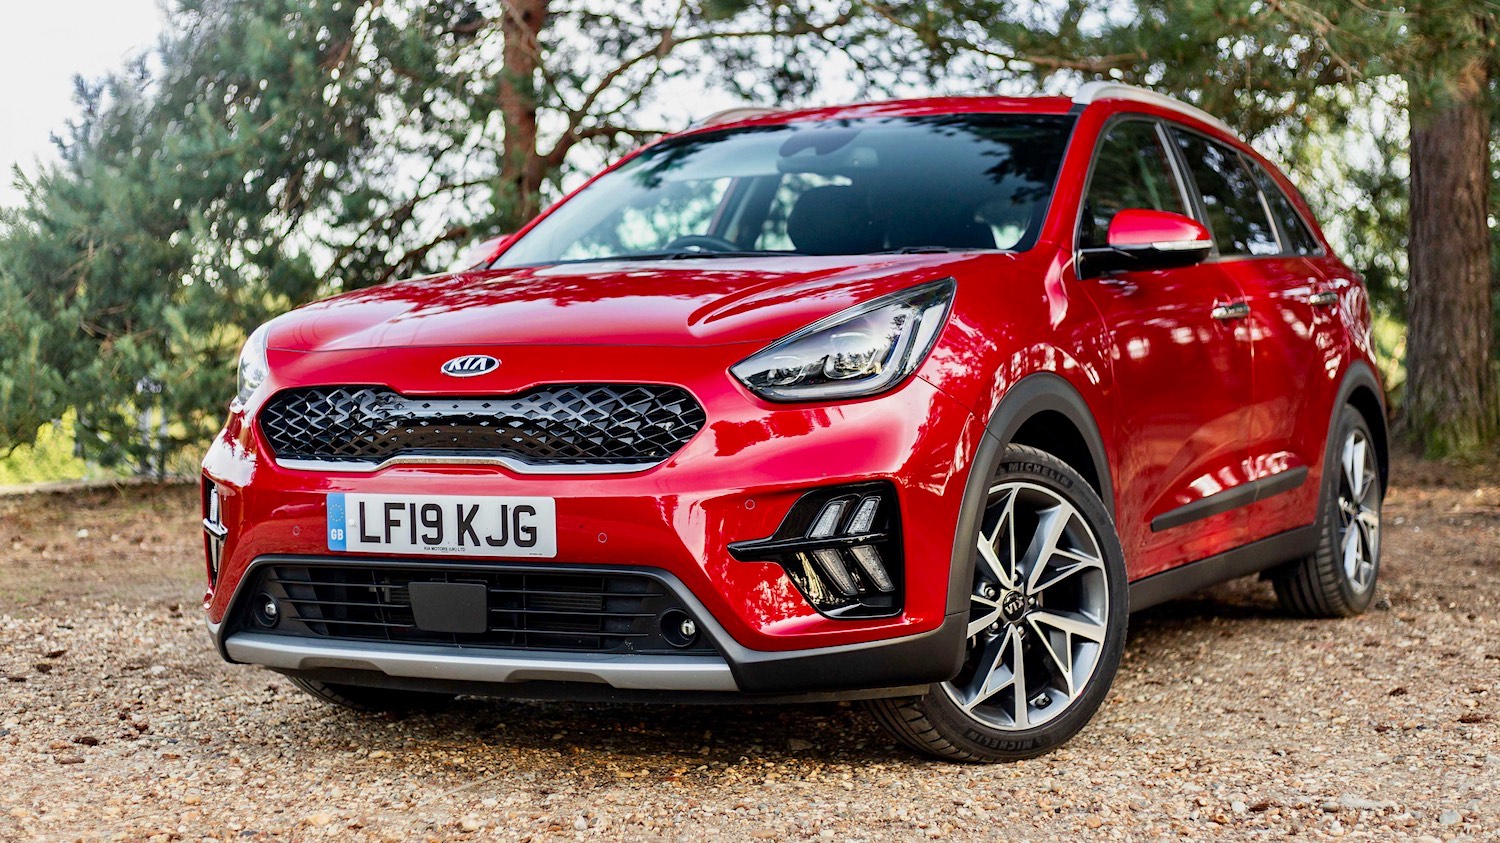 Reviewed | Kia Niro 1.6 HEV, a step in the right direction